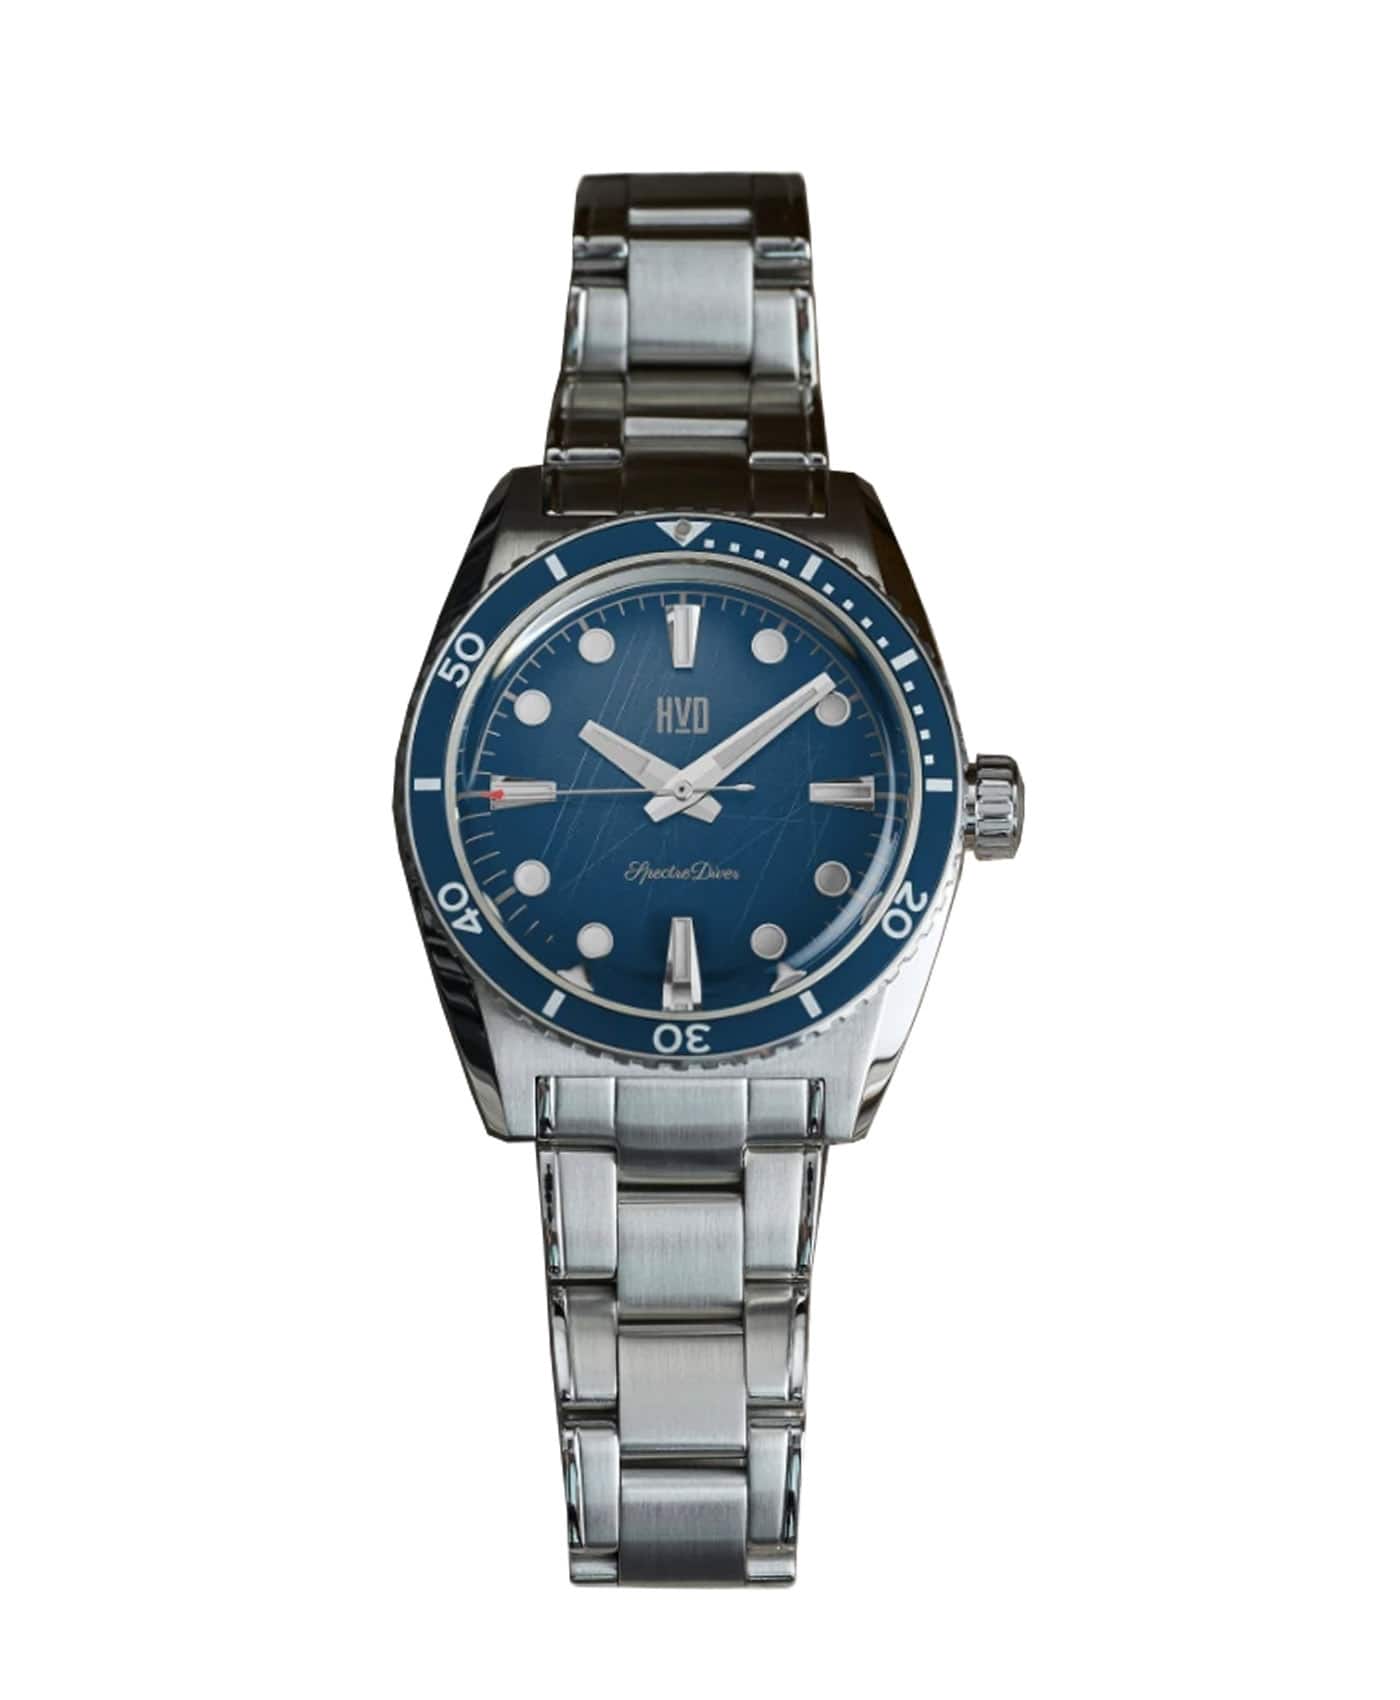 HVD Watches - SpectreDiver - Azurite - front